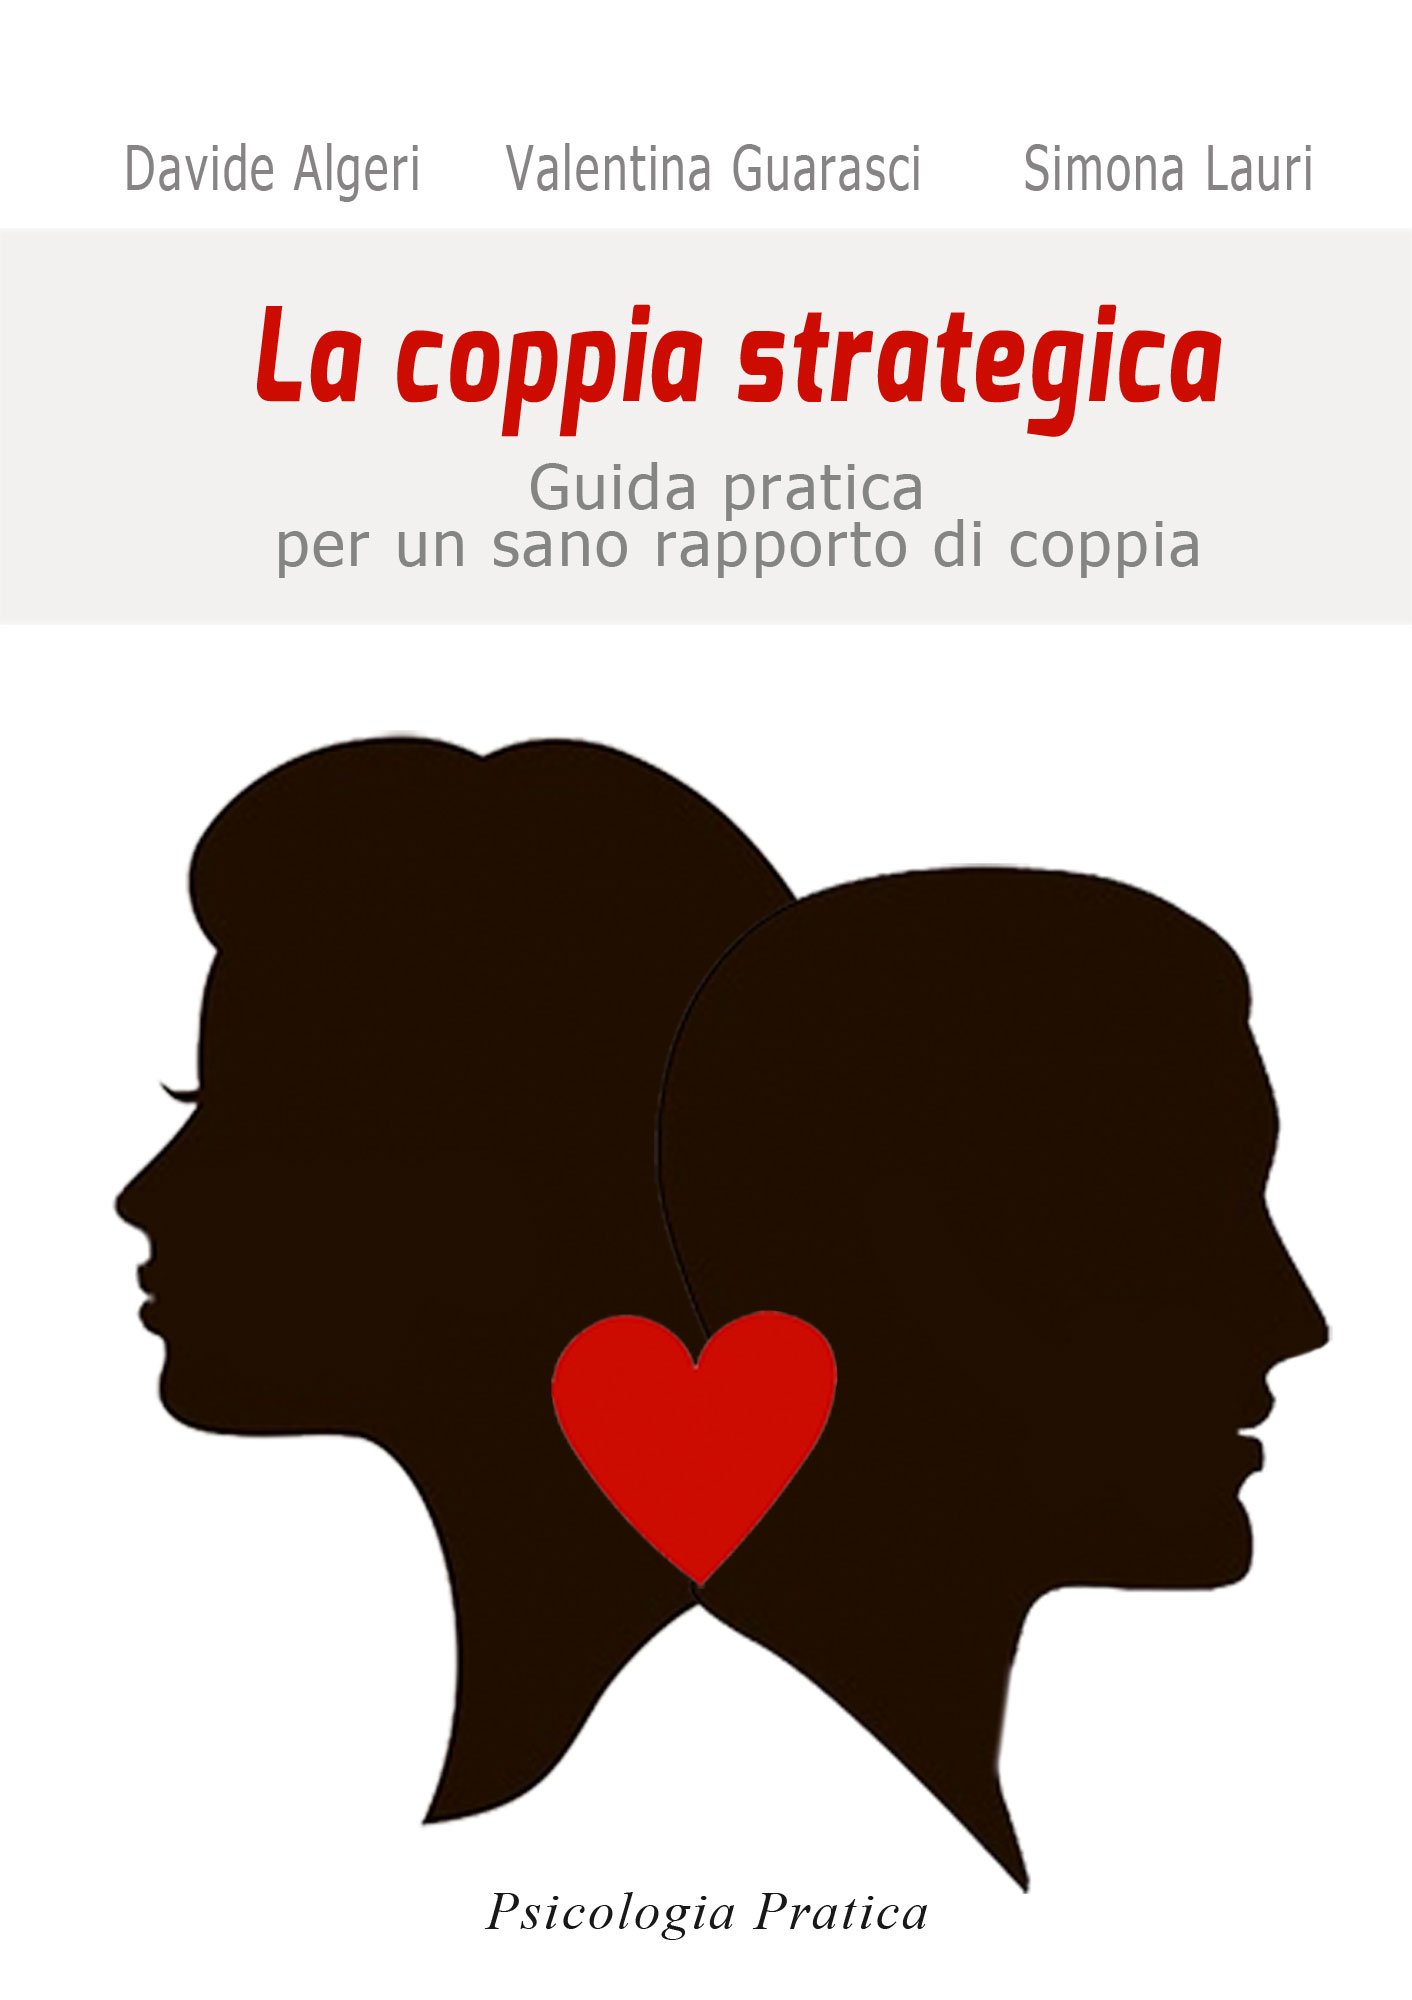 images/lacoppiastrategica-self-help-amore.jpg